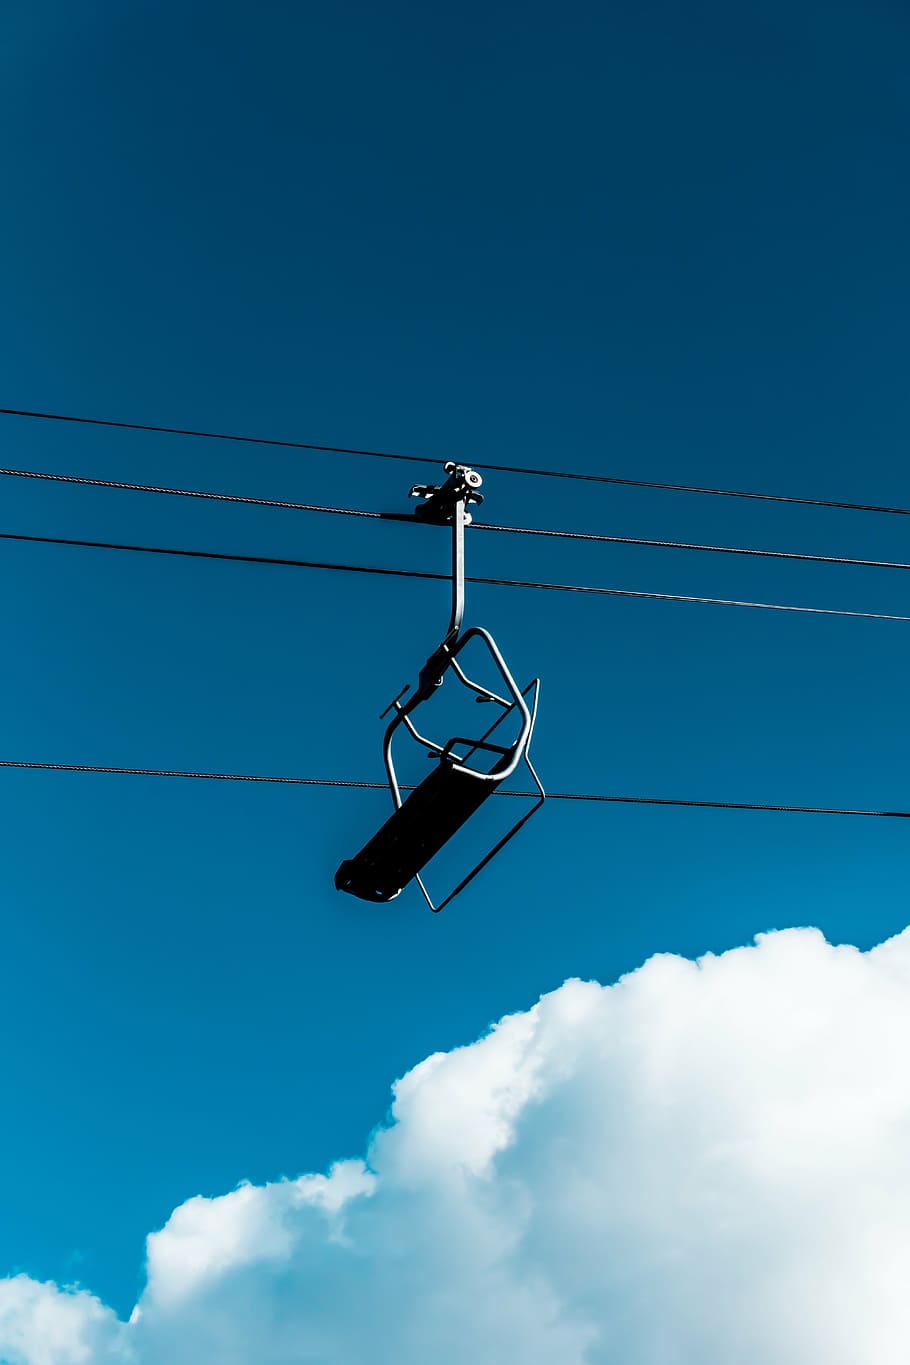 black, ski, lift, cloudy, sky, white, steel, empty, cable, chair